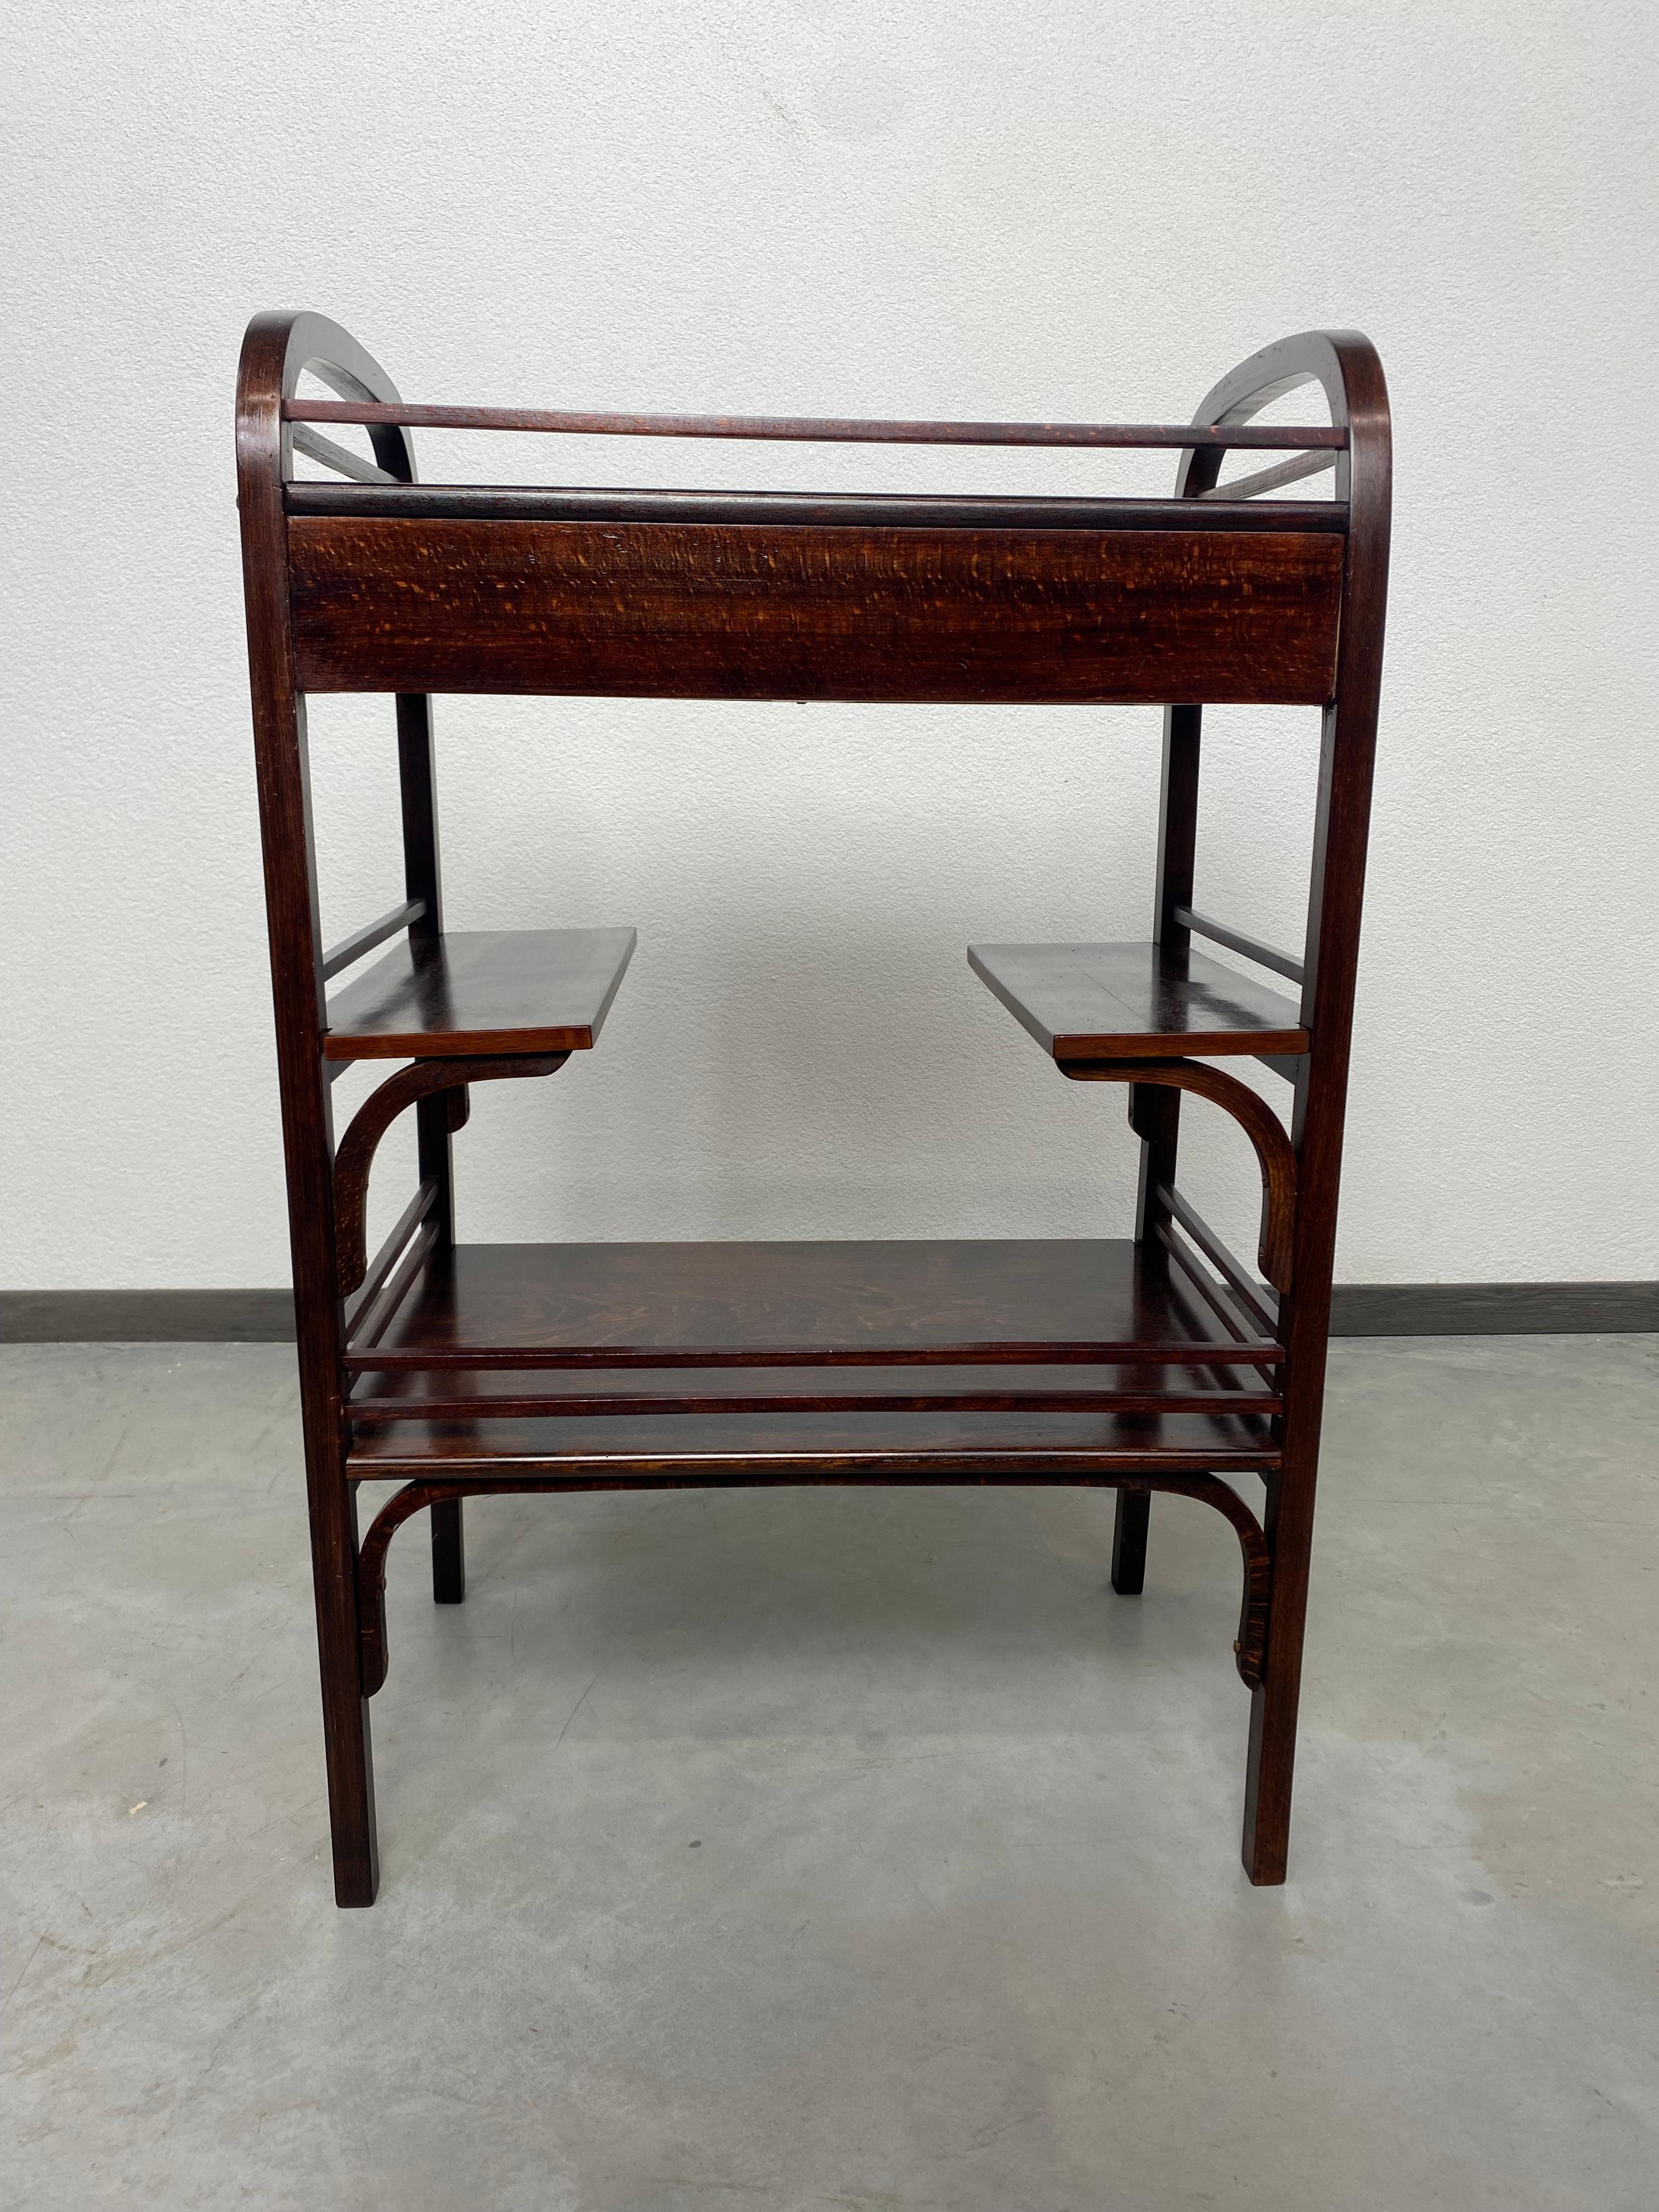 Vienna secession etagere atr. to Koloman Moser and Otto Wagner ex. by J&J Kohn For Sale 1